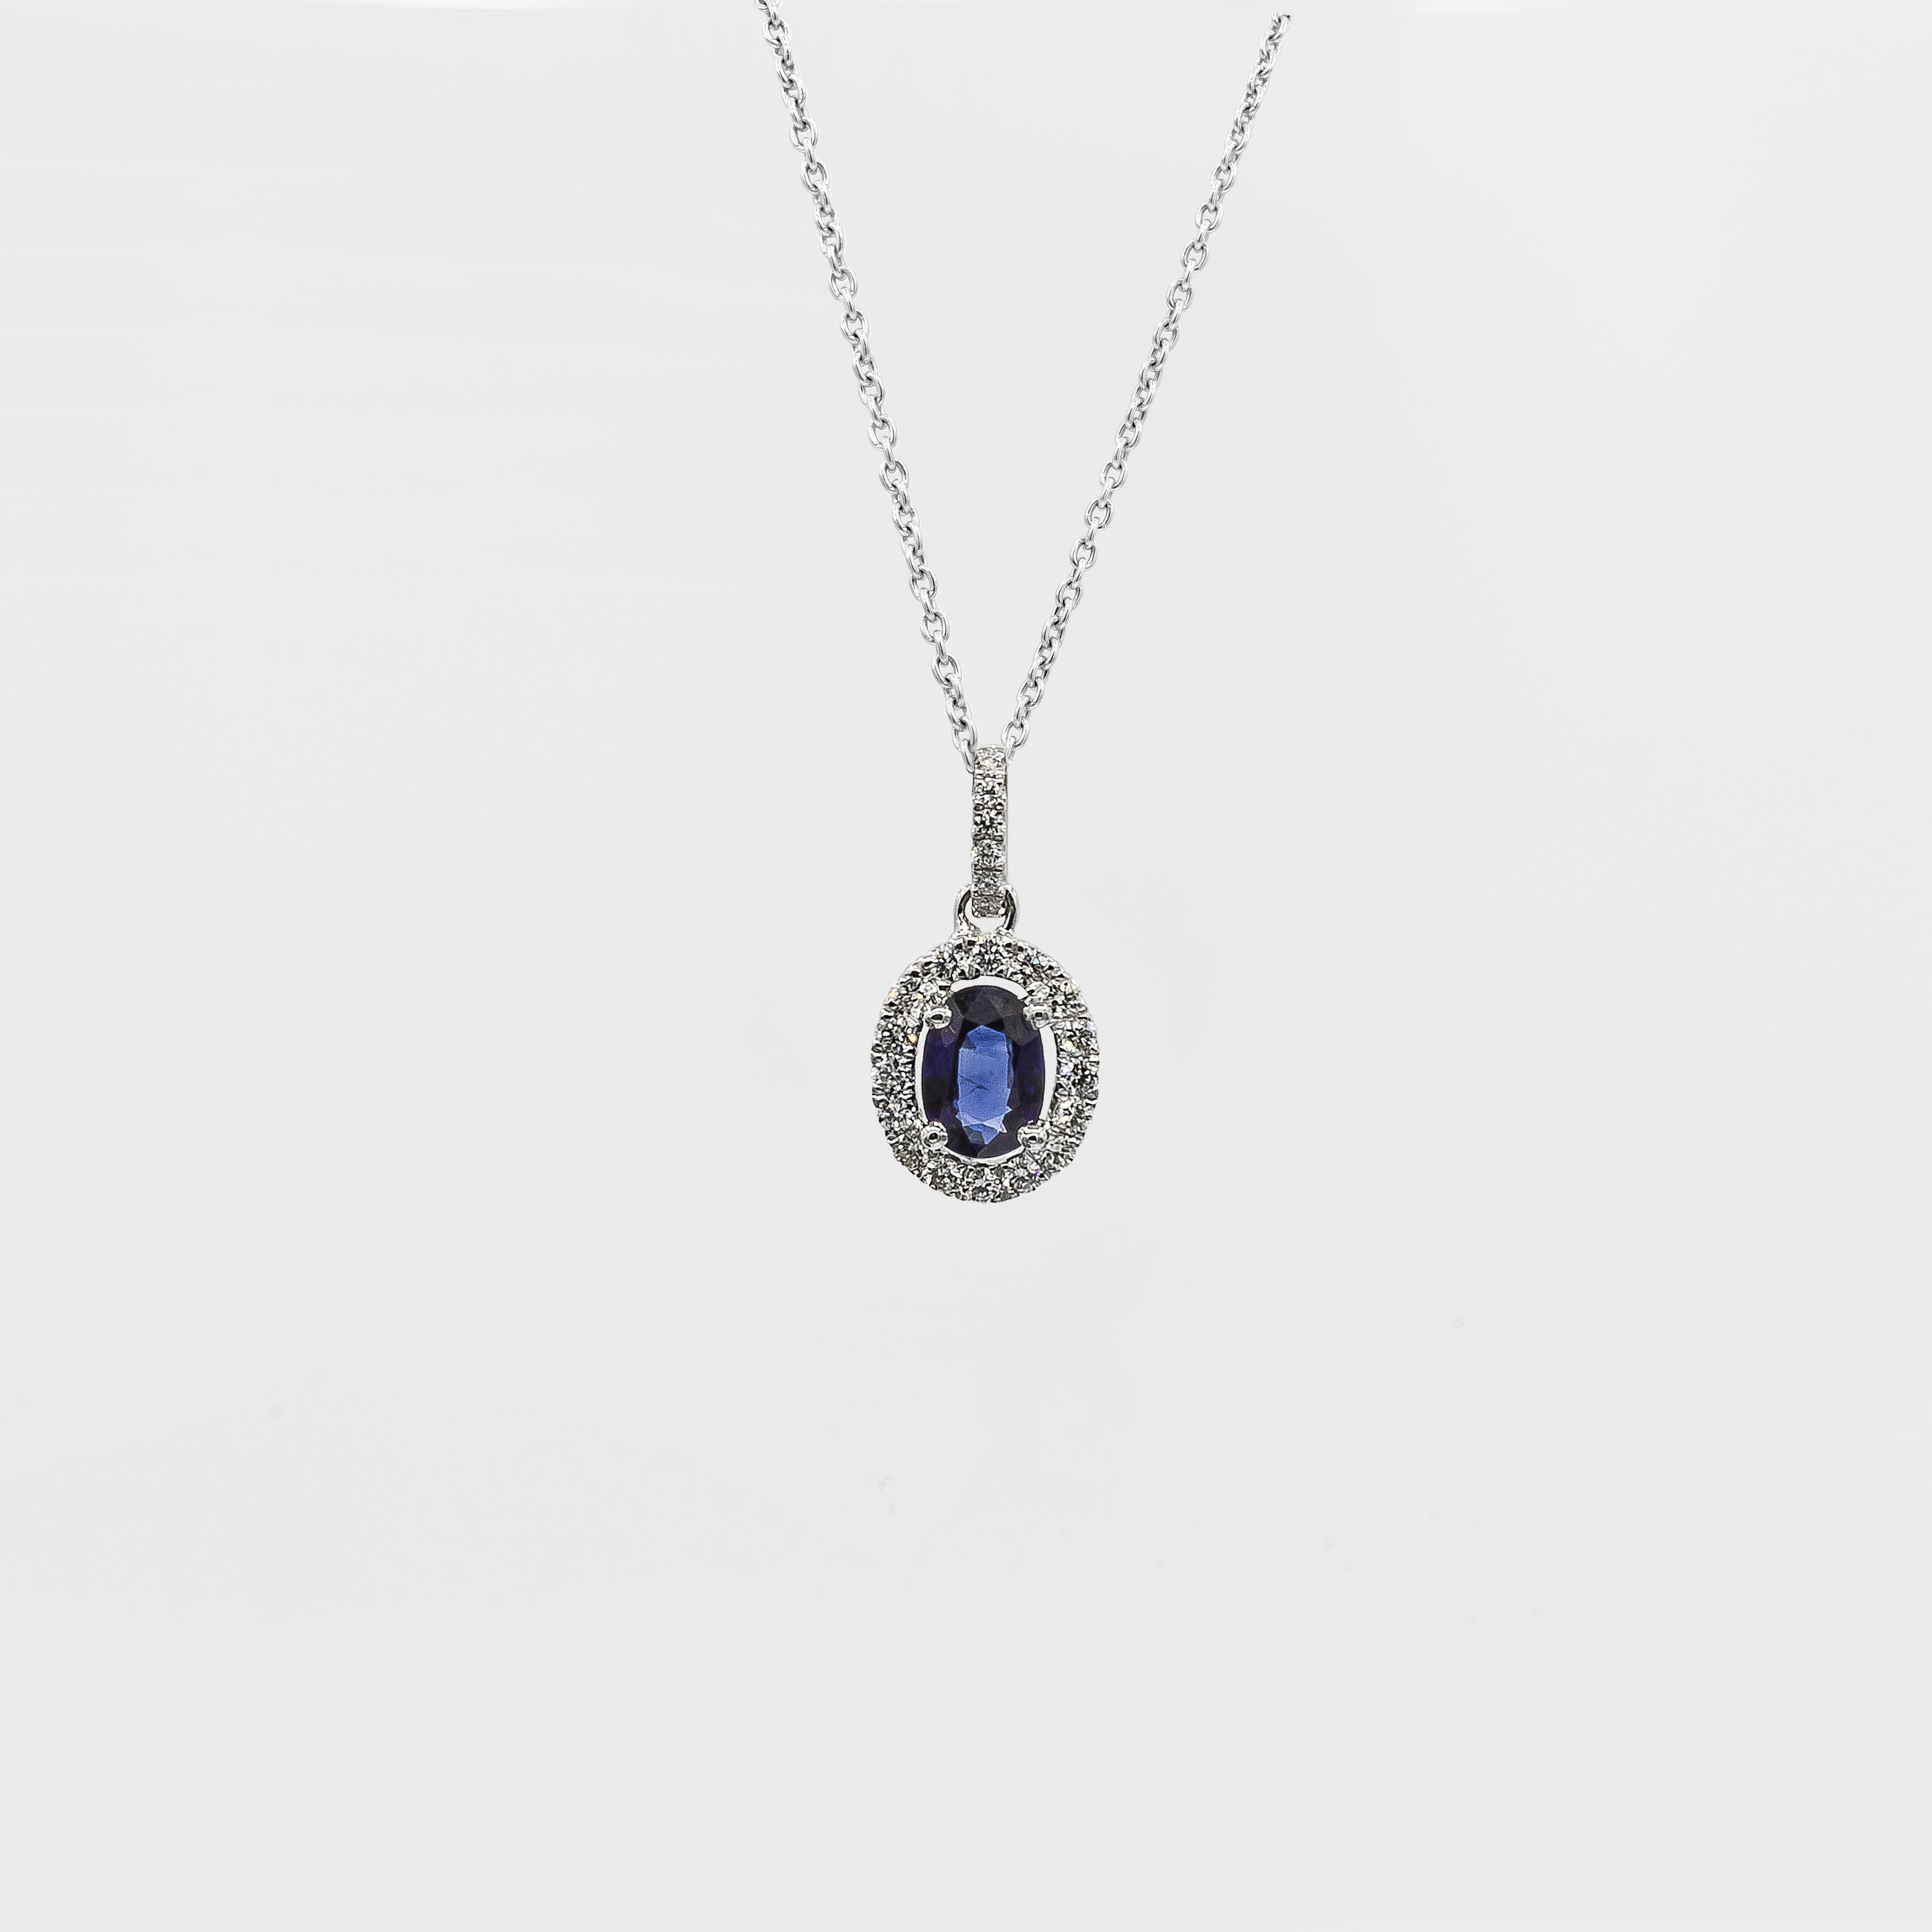 Showcasing a 0.69 carat oval cut blue sapphire, set in a floating halo of round brilliant diamonds weighing 0.27 carats total. Suspended on a diamond encrusted bale in an 16 inch white gold chain 

Style available in different price ranges. Prices